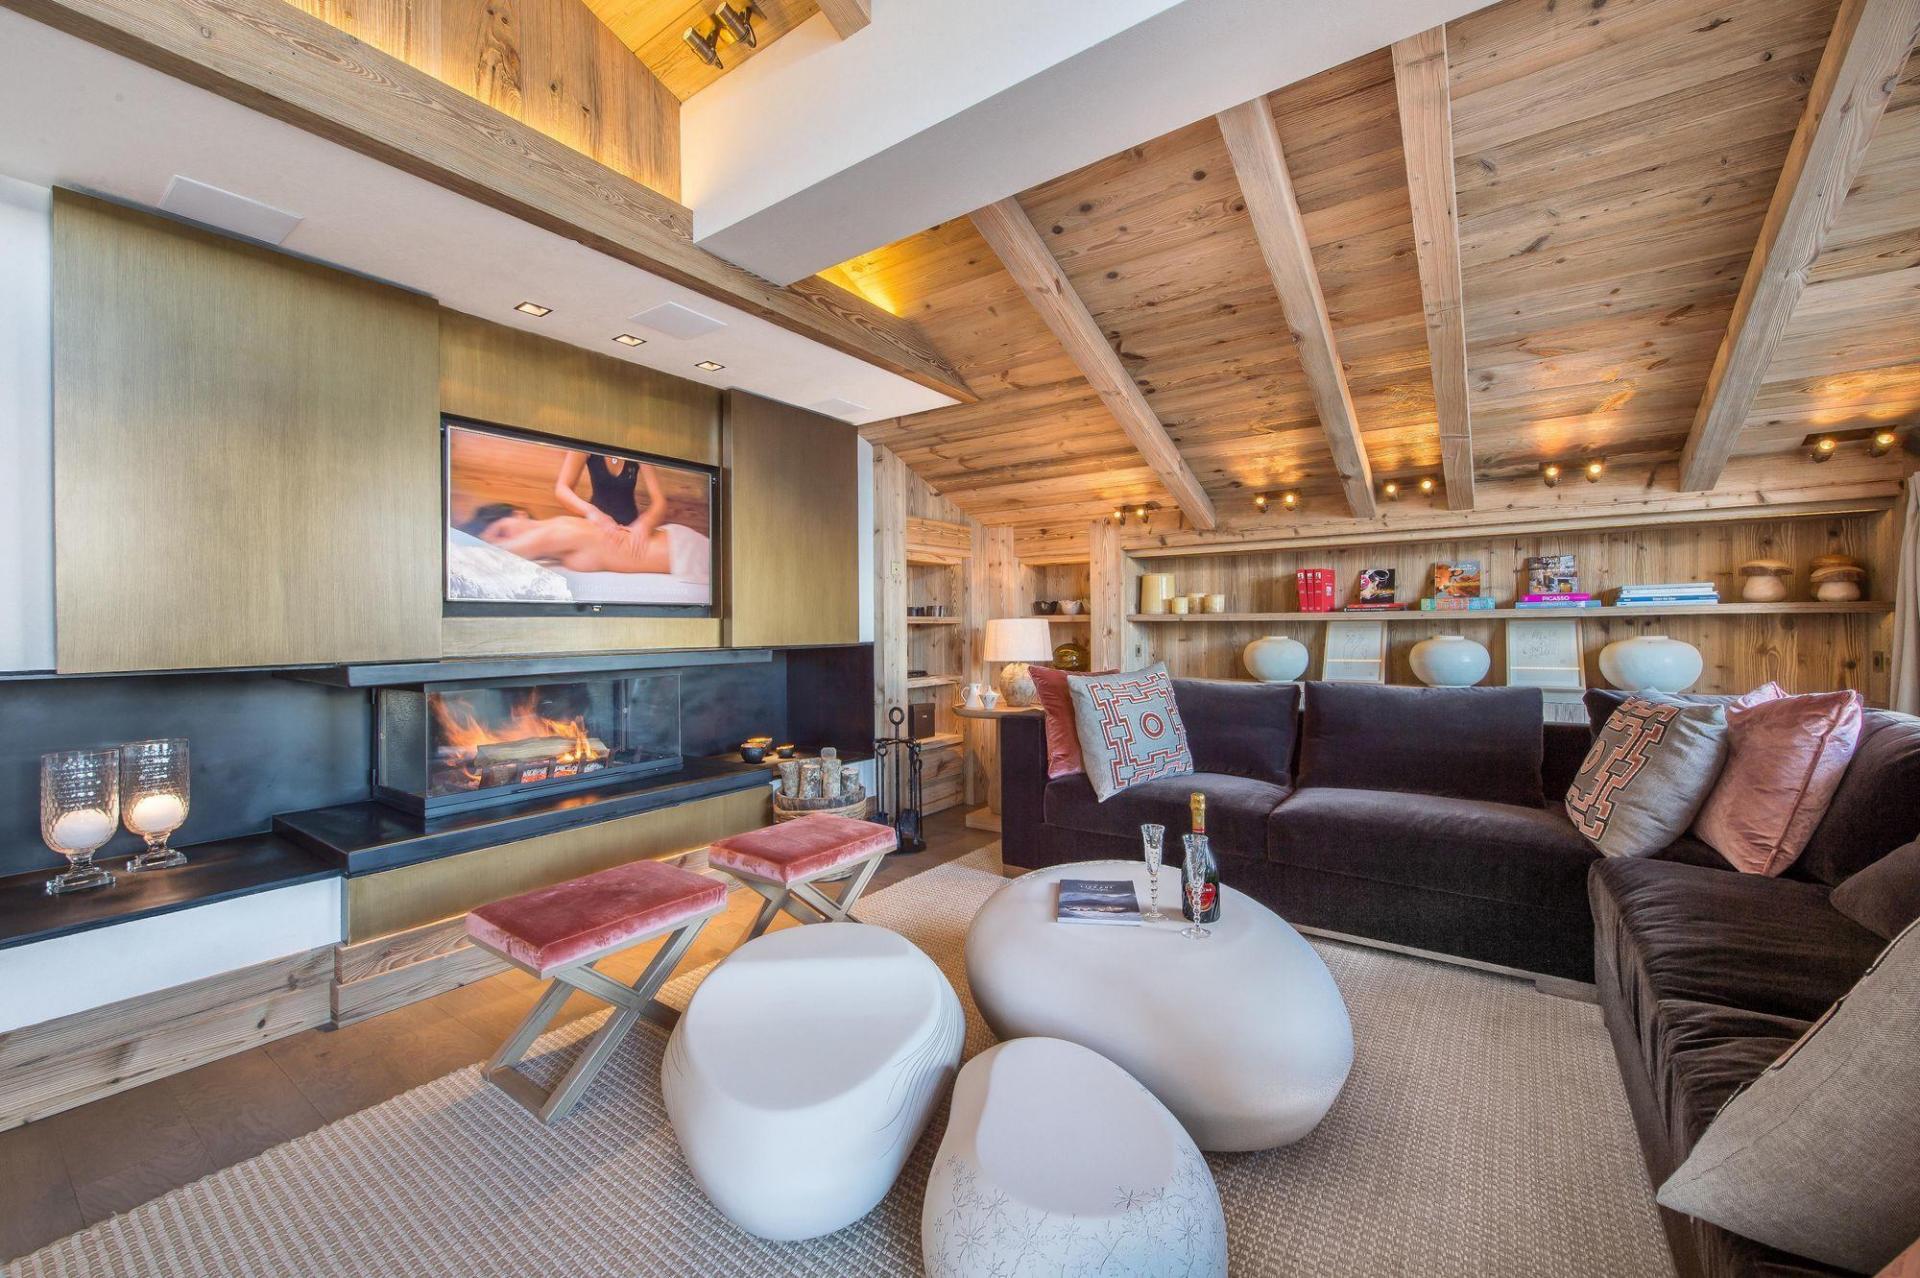 THE LOUNGE AND ITS FIREPLACE IN CHALET DES CHENUS IN THE FRENCH ALPS